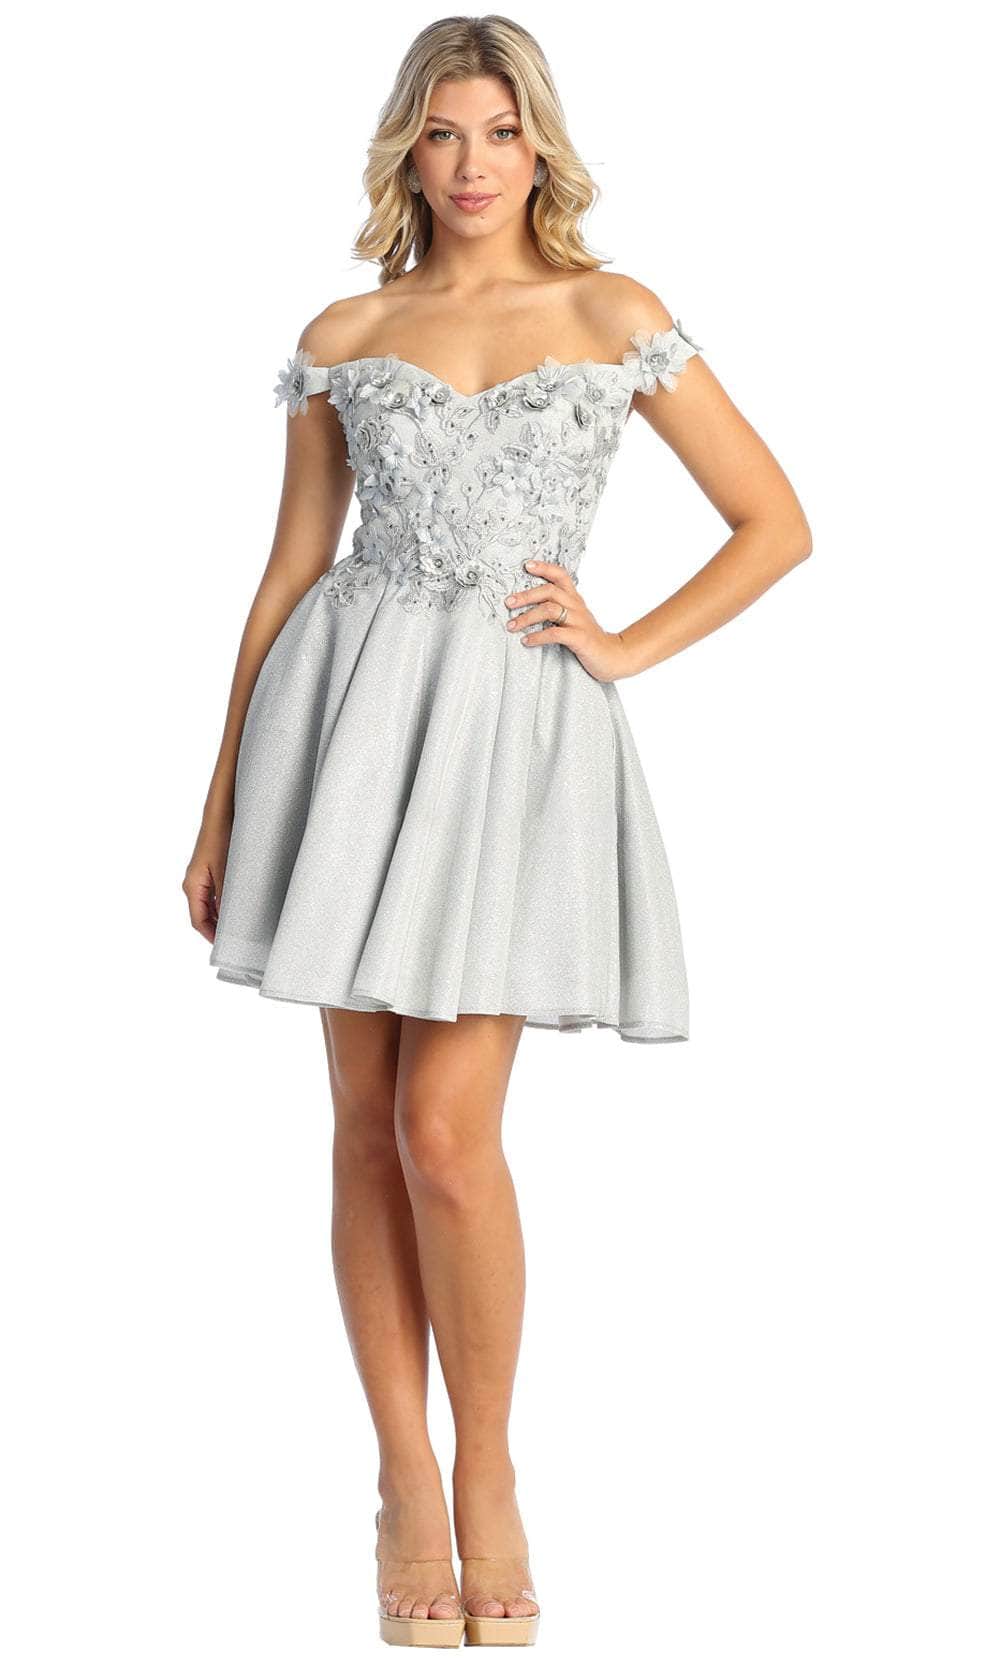 May Queen MQ1906 - Floral Appliqued Sweetheart Cocktail Dress Cocktail Dresses